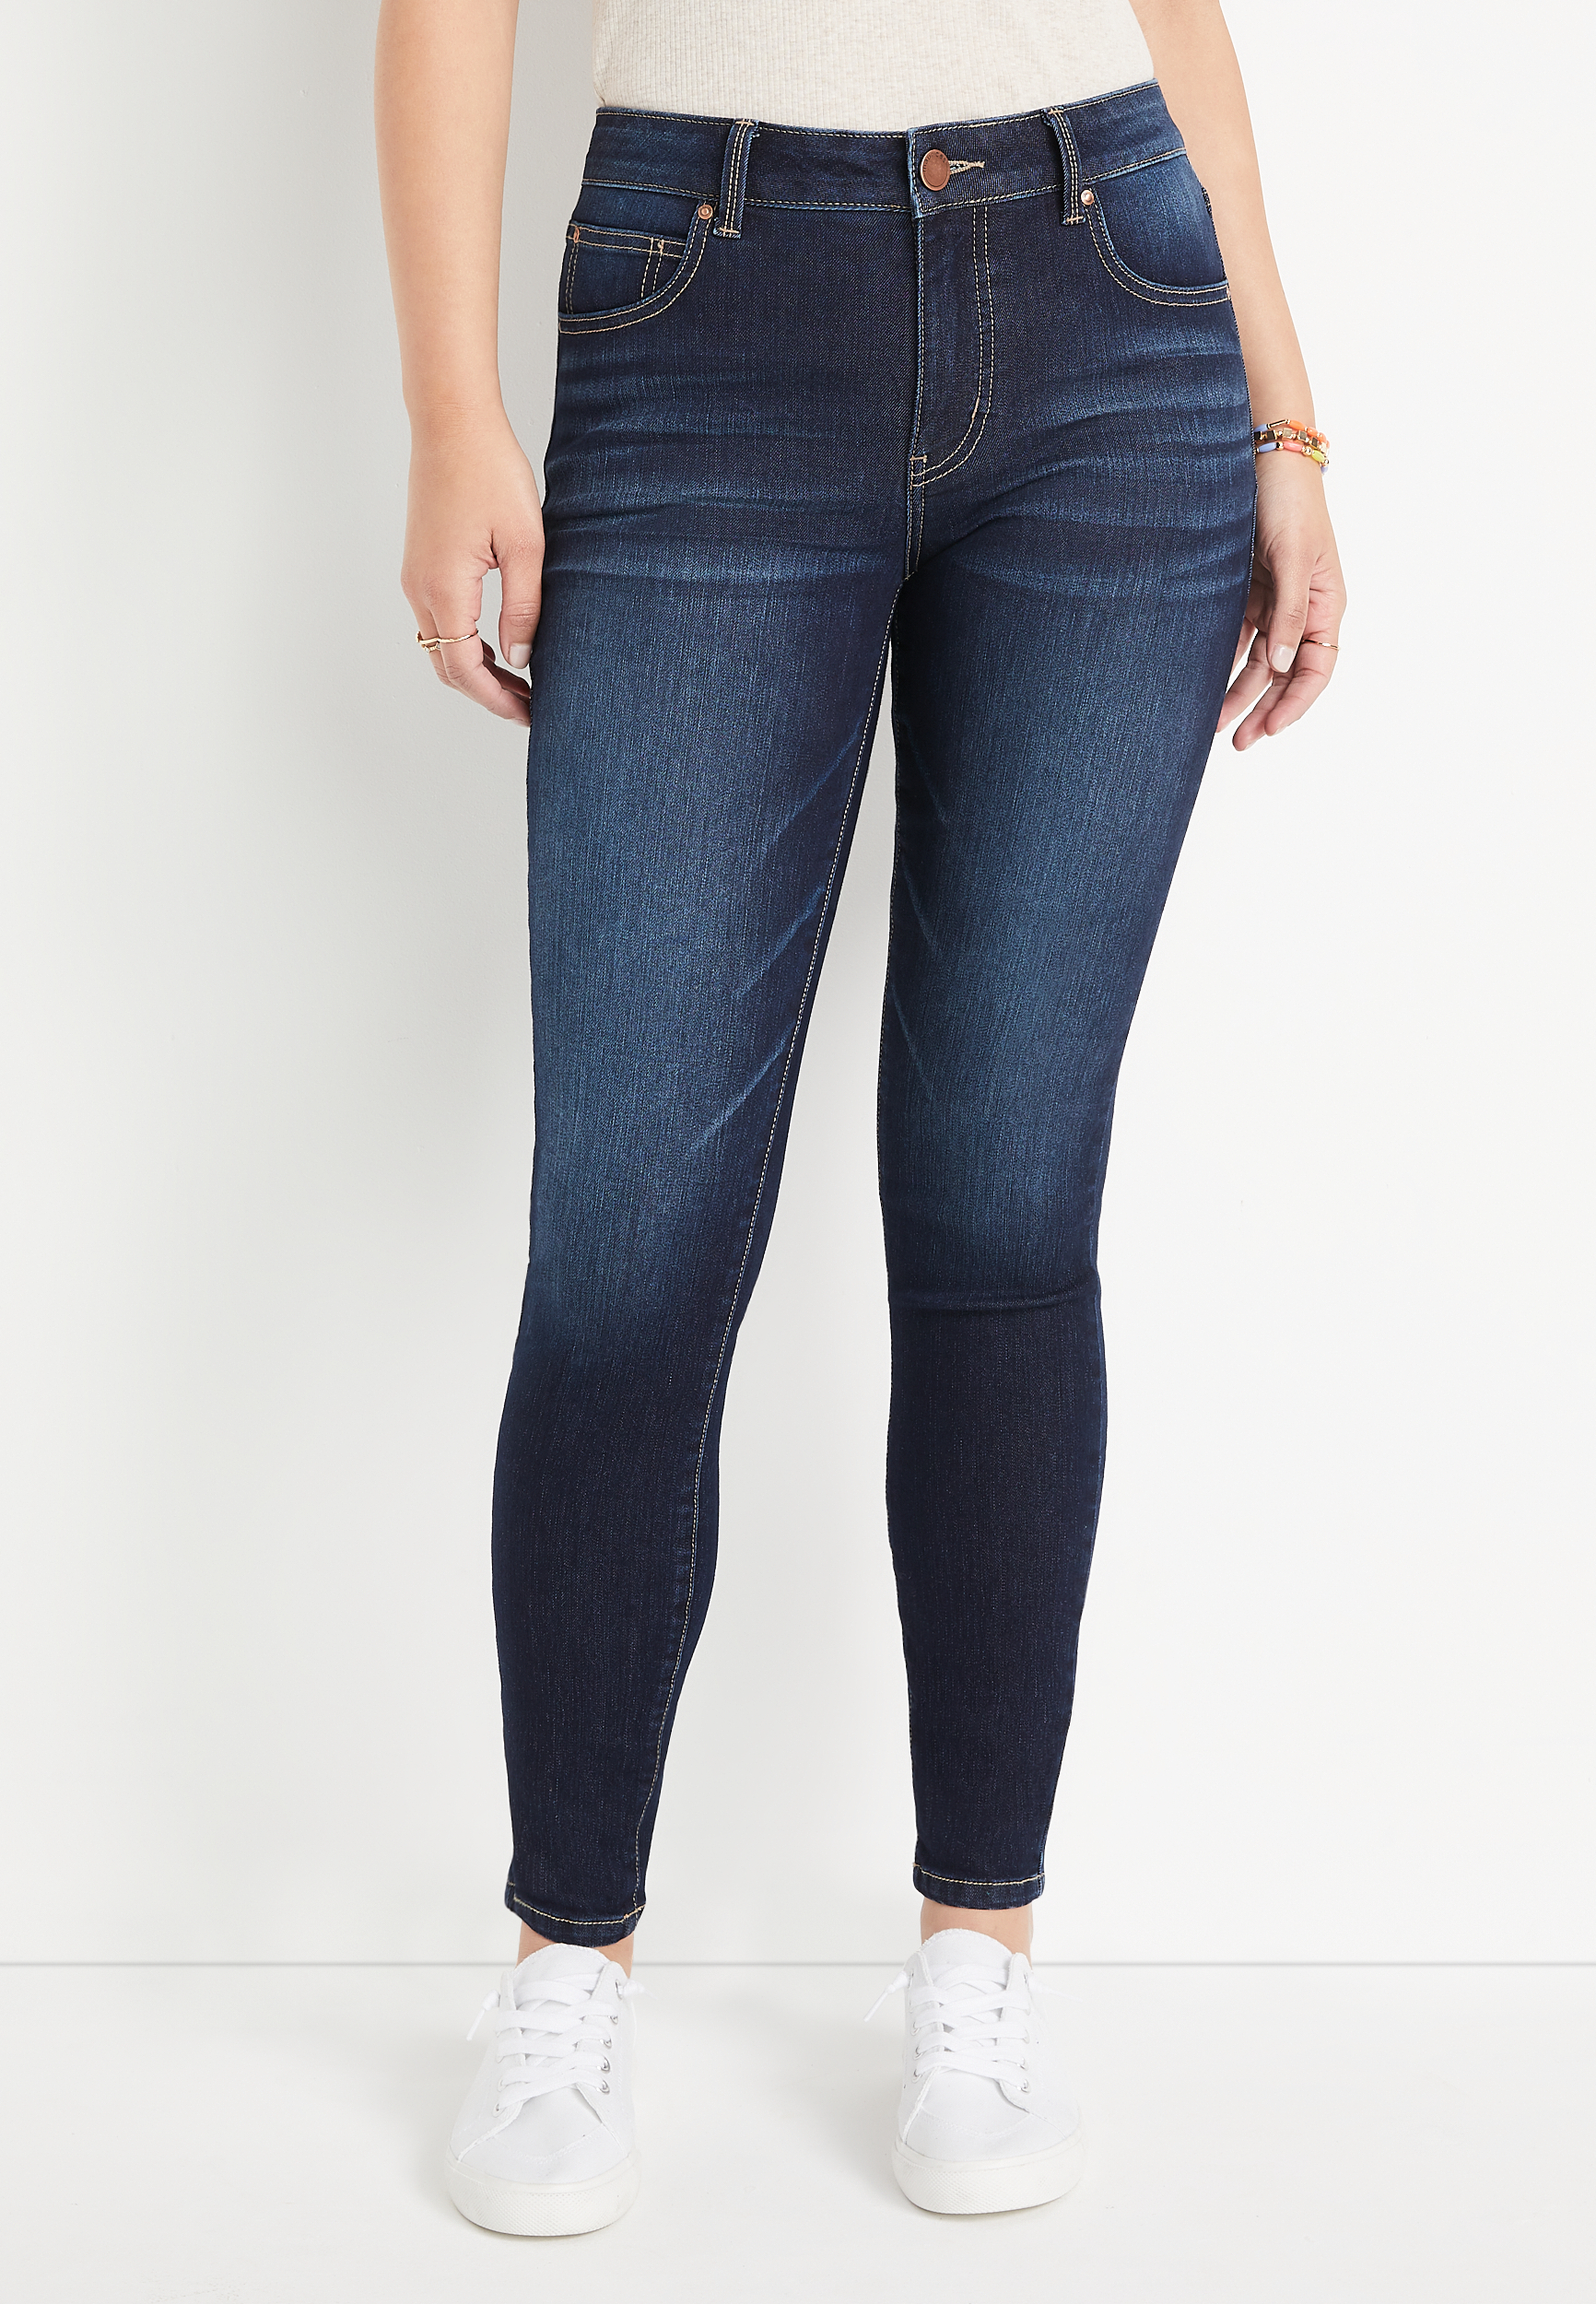 jeans by maurices™ Everflex™ Super Rise Stretch Jean |